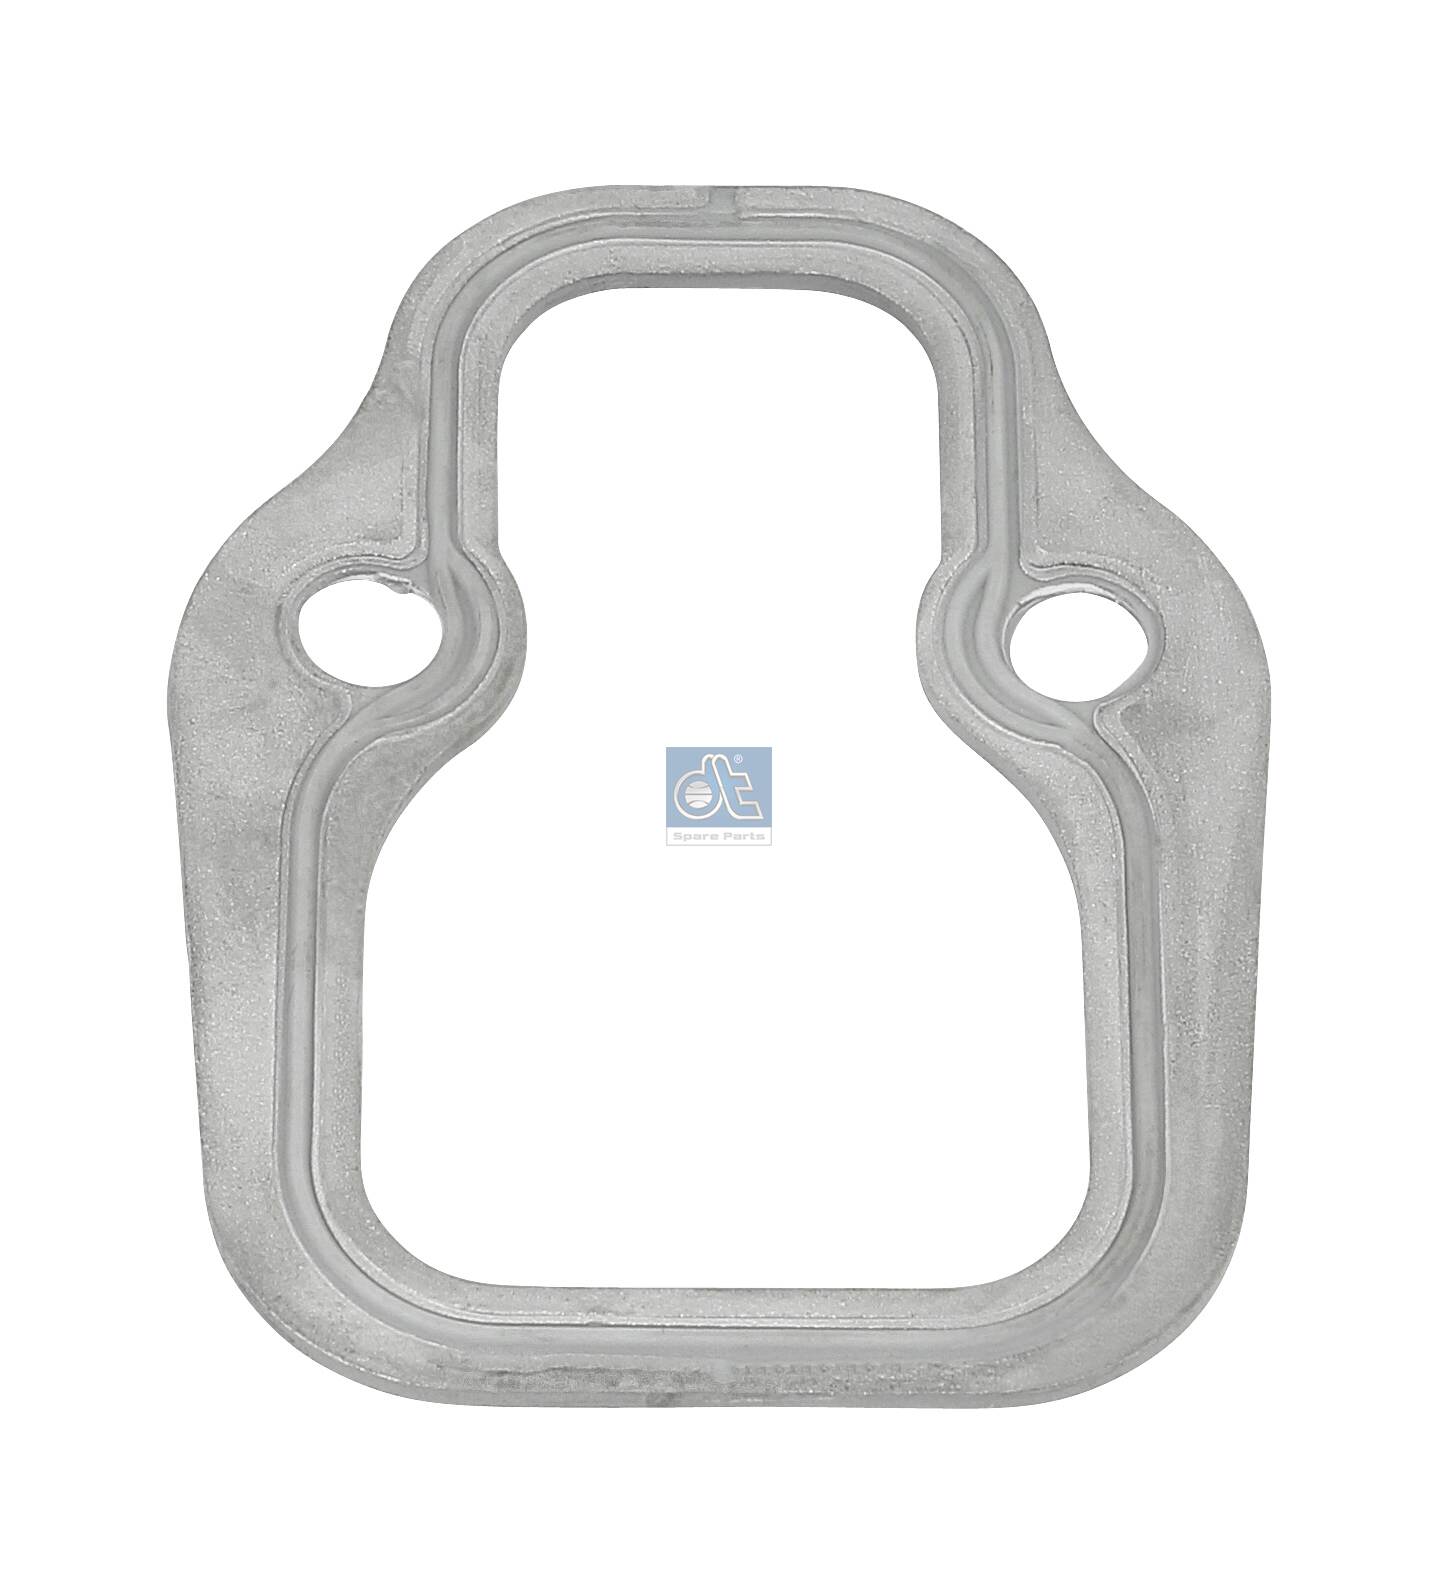 Gasket, exhaust manifold - 4.20213 DT Spare Parts - 4031410380, 51.08902.0054, 4031410980